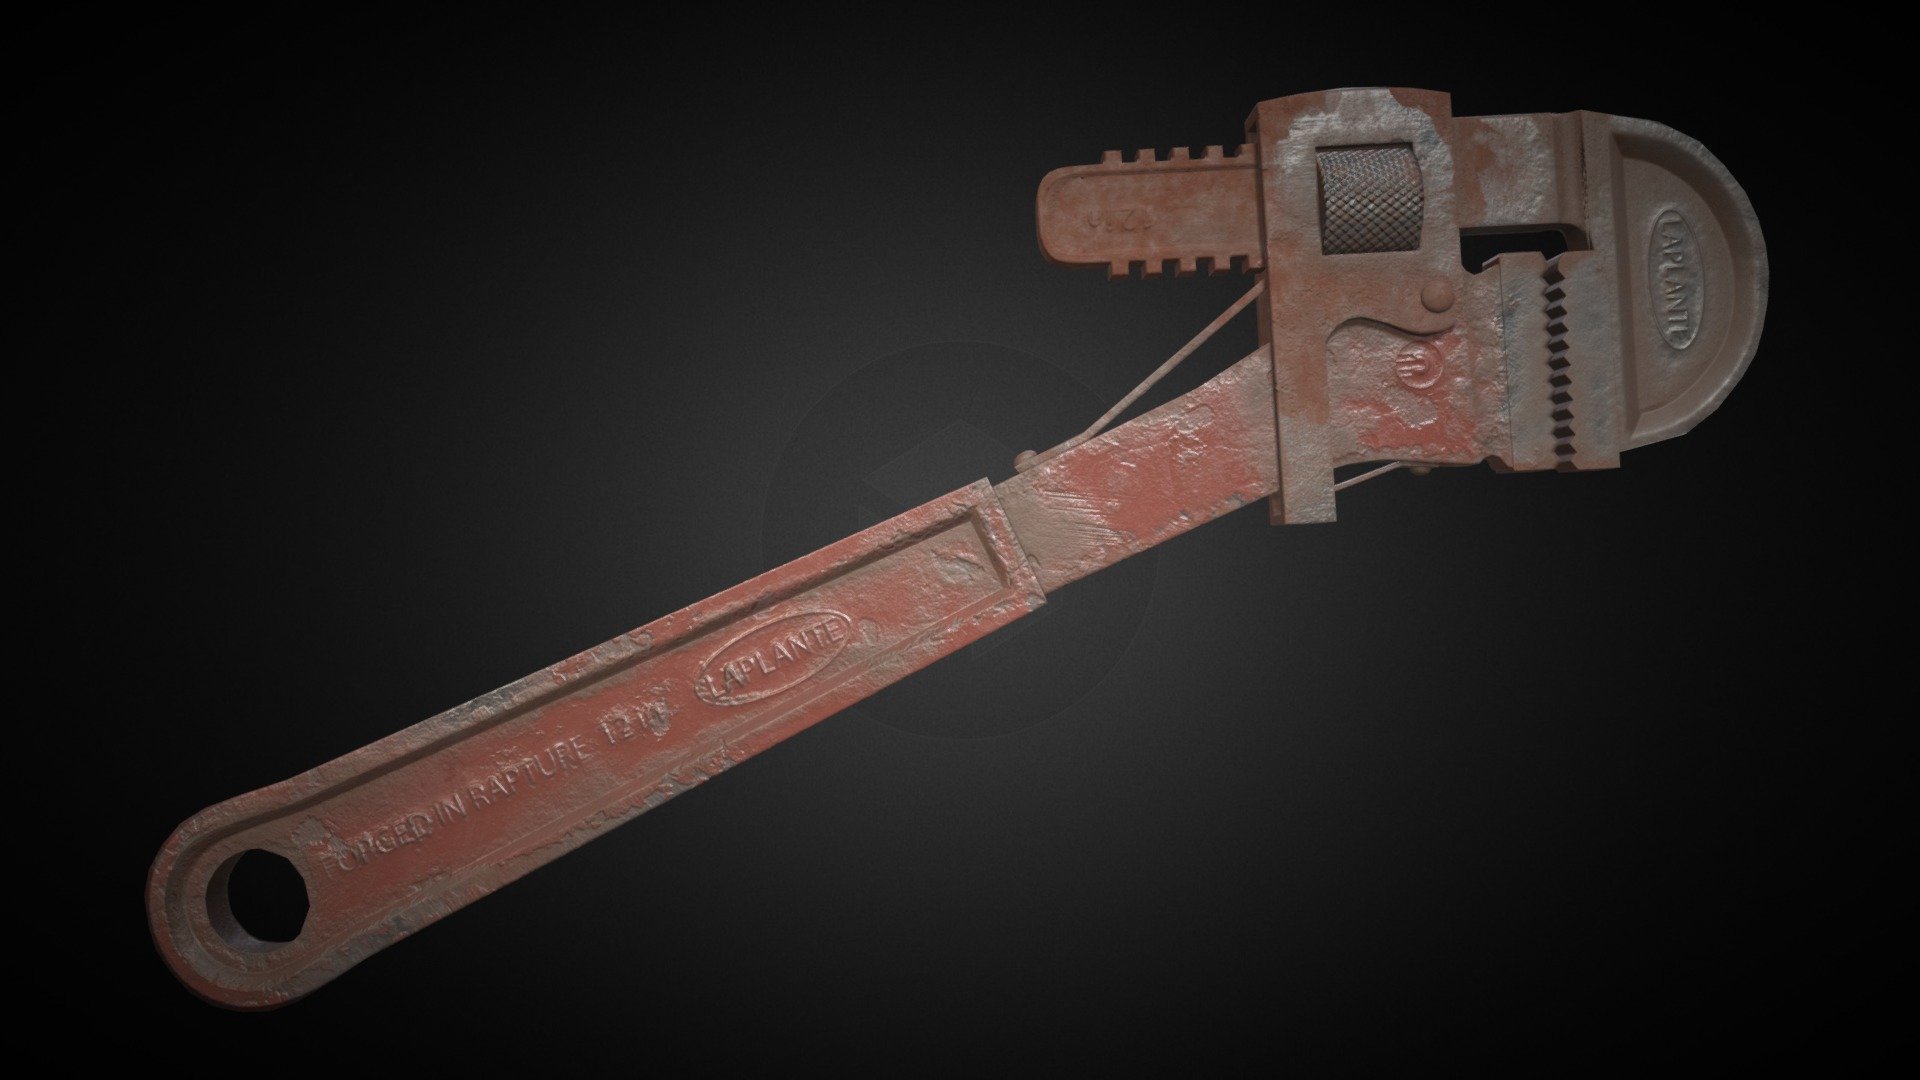 I made this pipe wrench for an assignment for uni. We were given over 6 weeks to model the high poly, low poly (in 3ds max) then we had to bake and texture the object in substance painter or photoshop. I chose substance painter. My materials were made in substance designer - Pipe Wrench - 3D model by burstasia 3d model